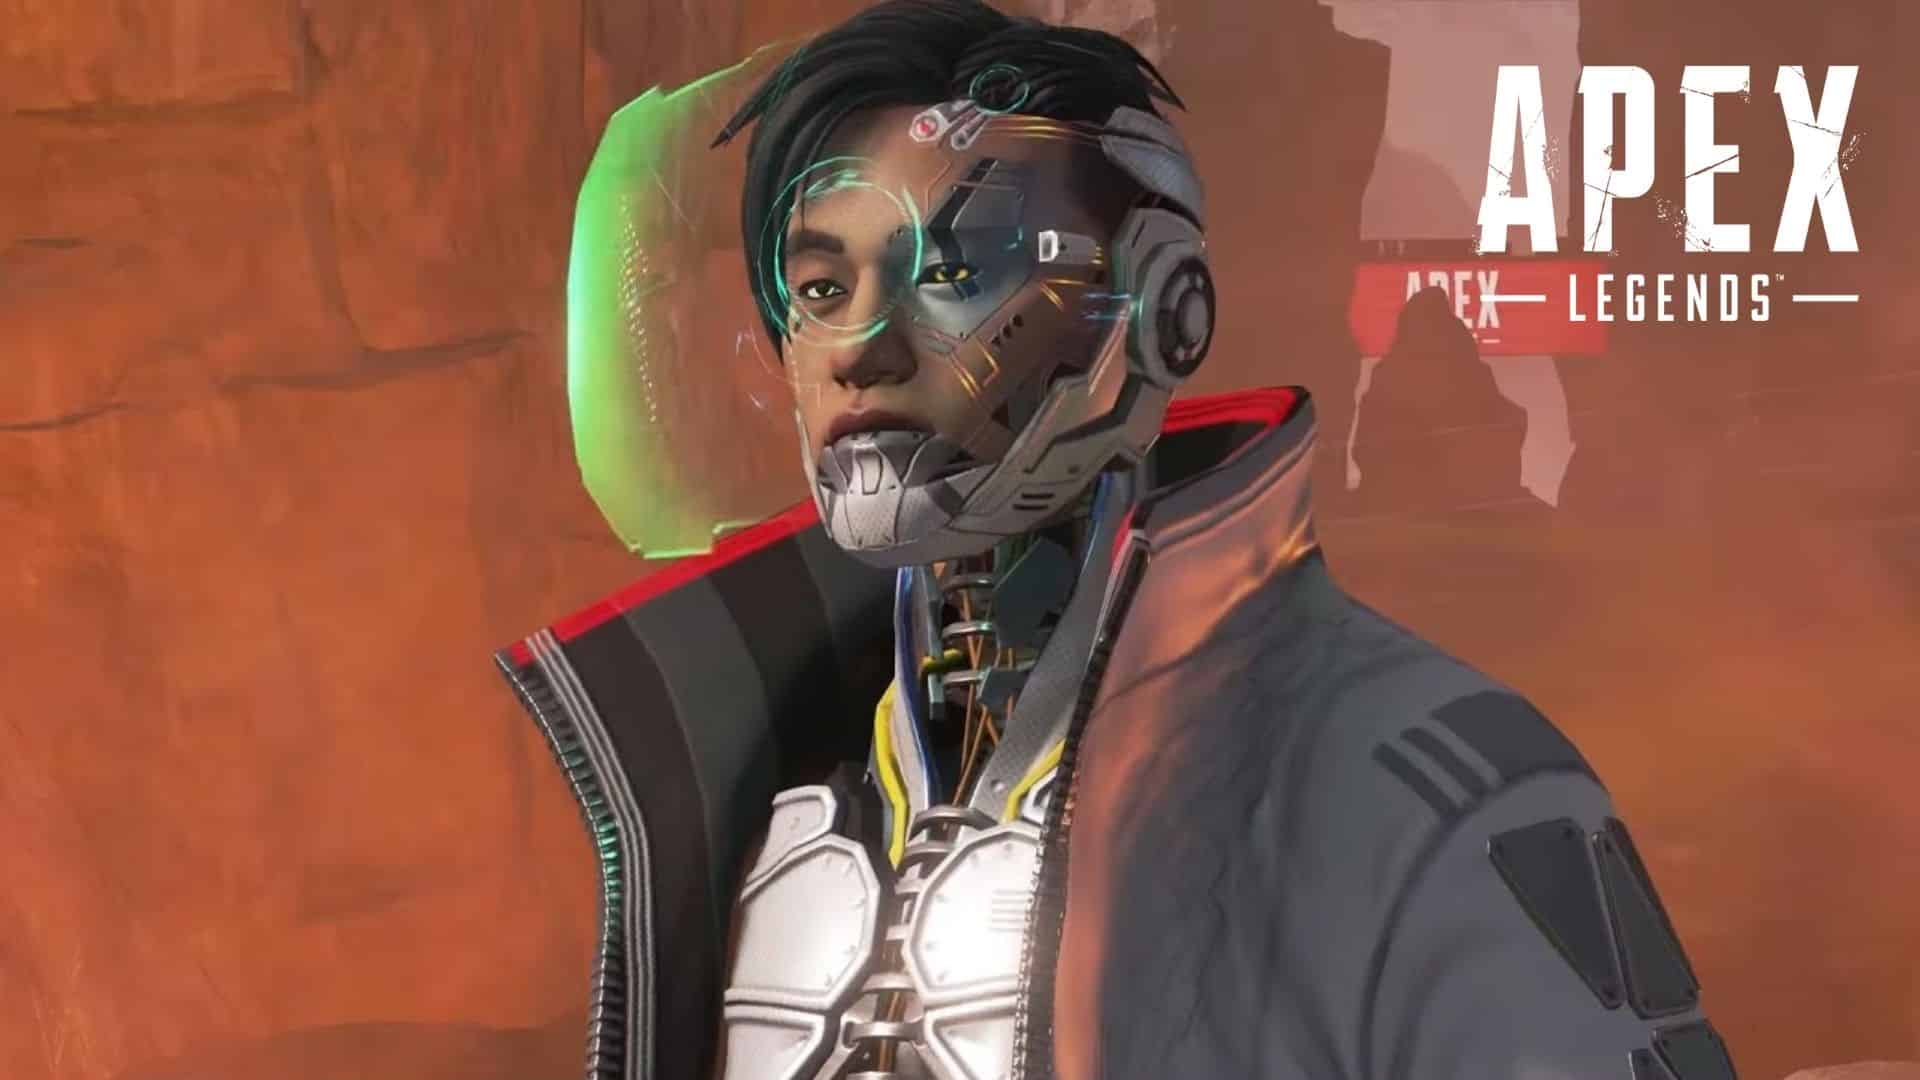 Crypto in Apex Legends using his drone